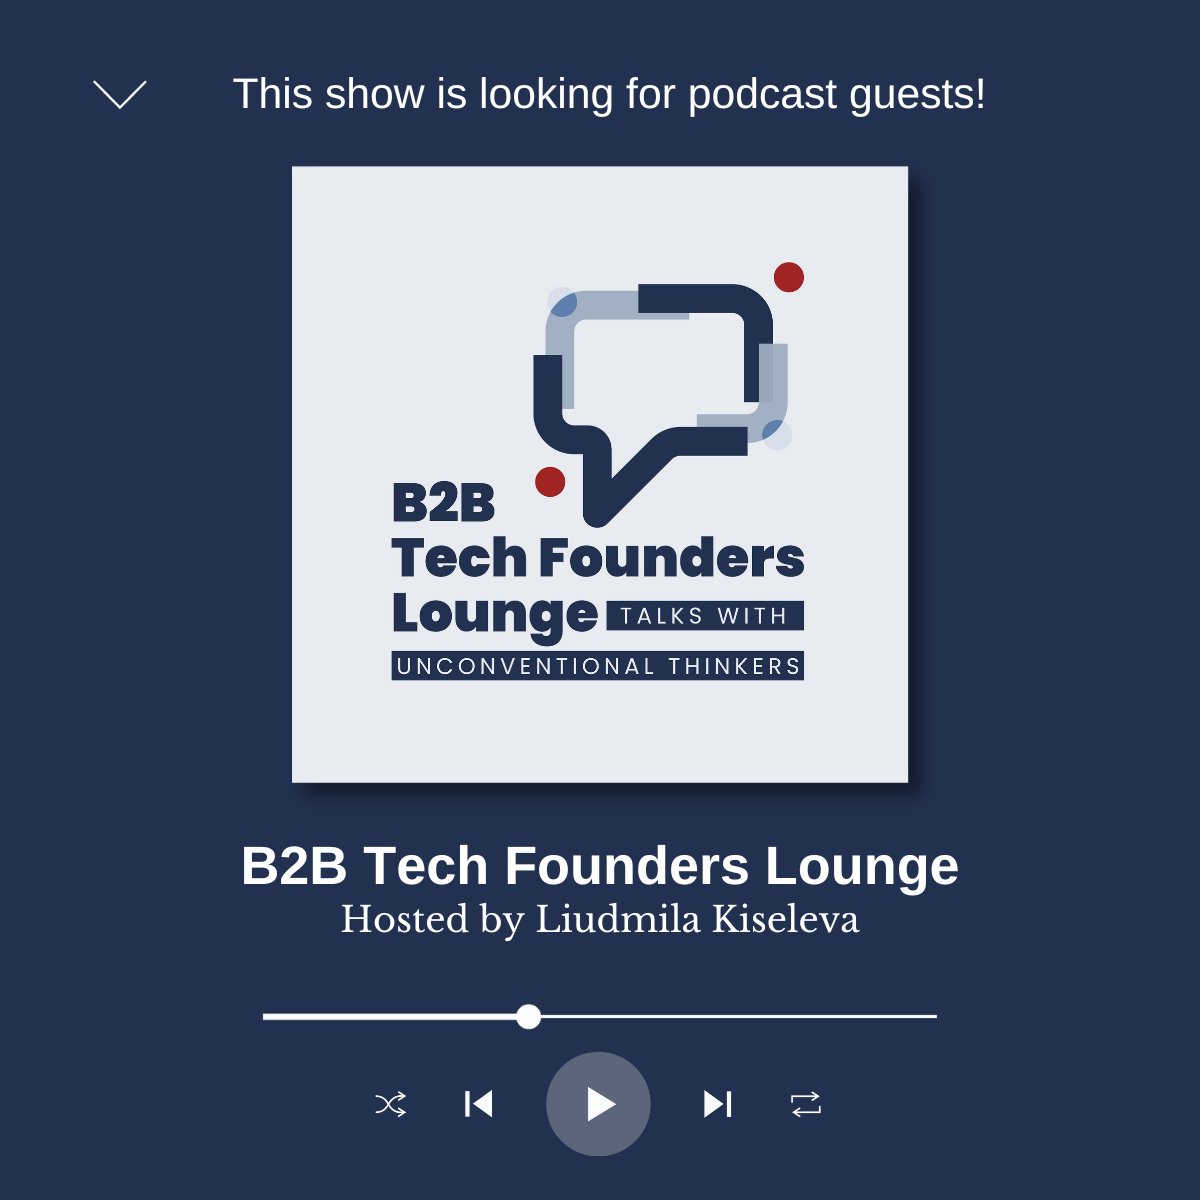 The B2B Tech Founders Lounge Podcast hosted by Liudmila Kiseleva is looking for new guests to interview! Check out the requirements and apply here: podcast.rampiq.agency/podcast-guest #podcast #SaaS #technology #beaguest #findaguest #journorequest